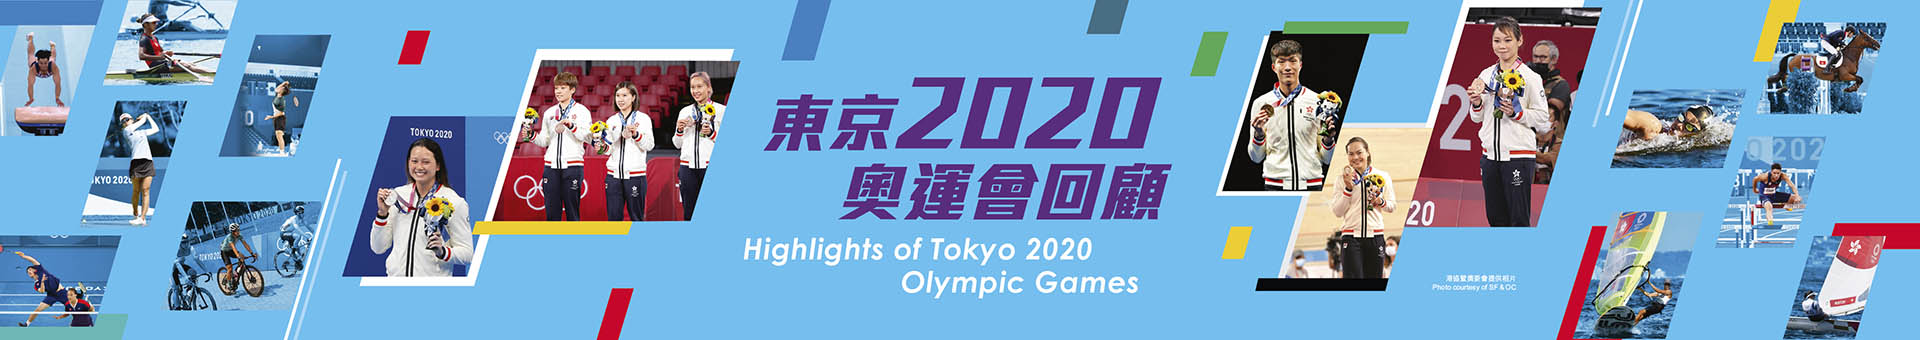 Highlights of Tokyo 2020 Olympic Games